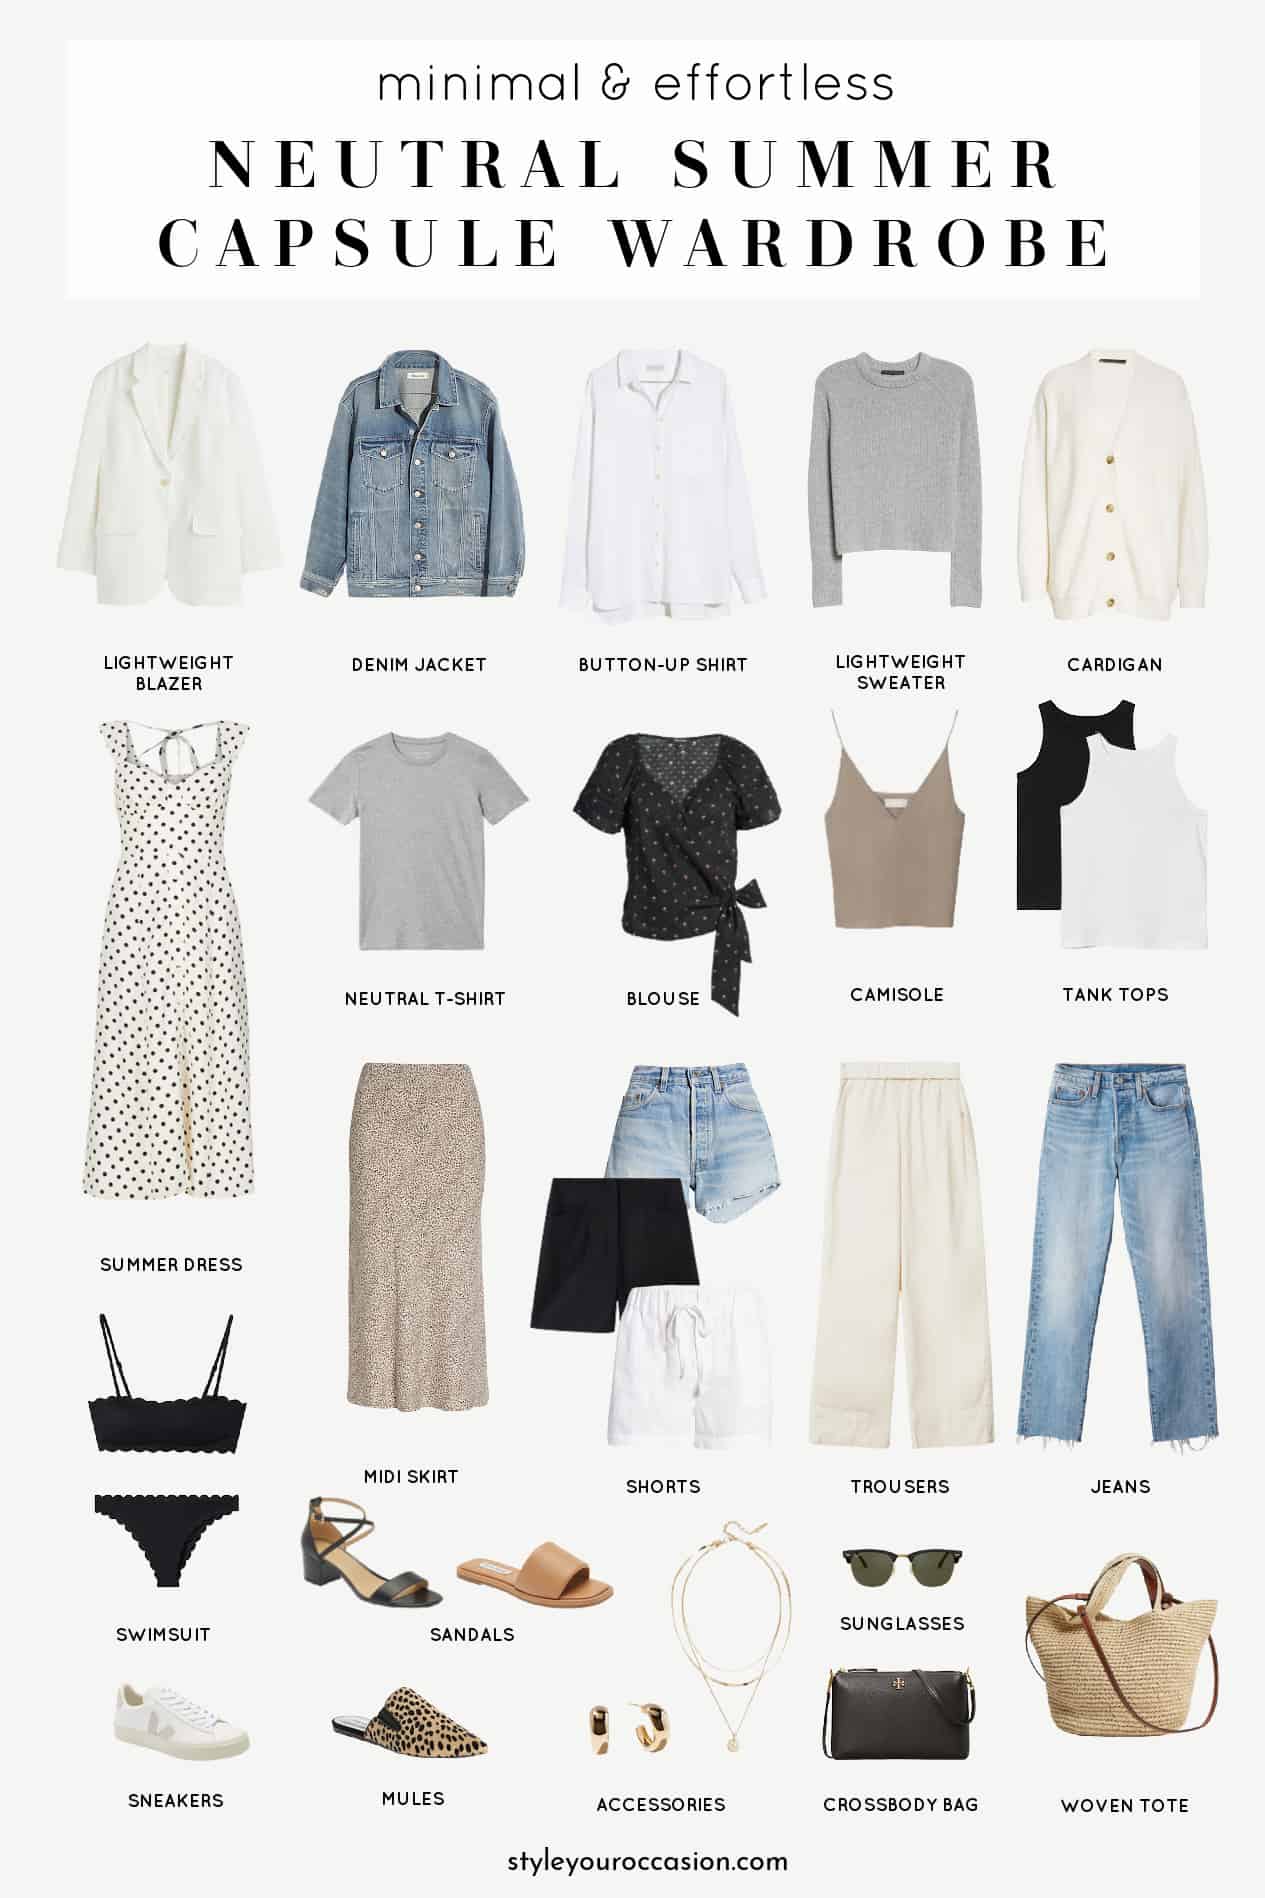 How to Start Adding Colour to Your Summer Capsule Wardrobe